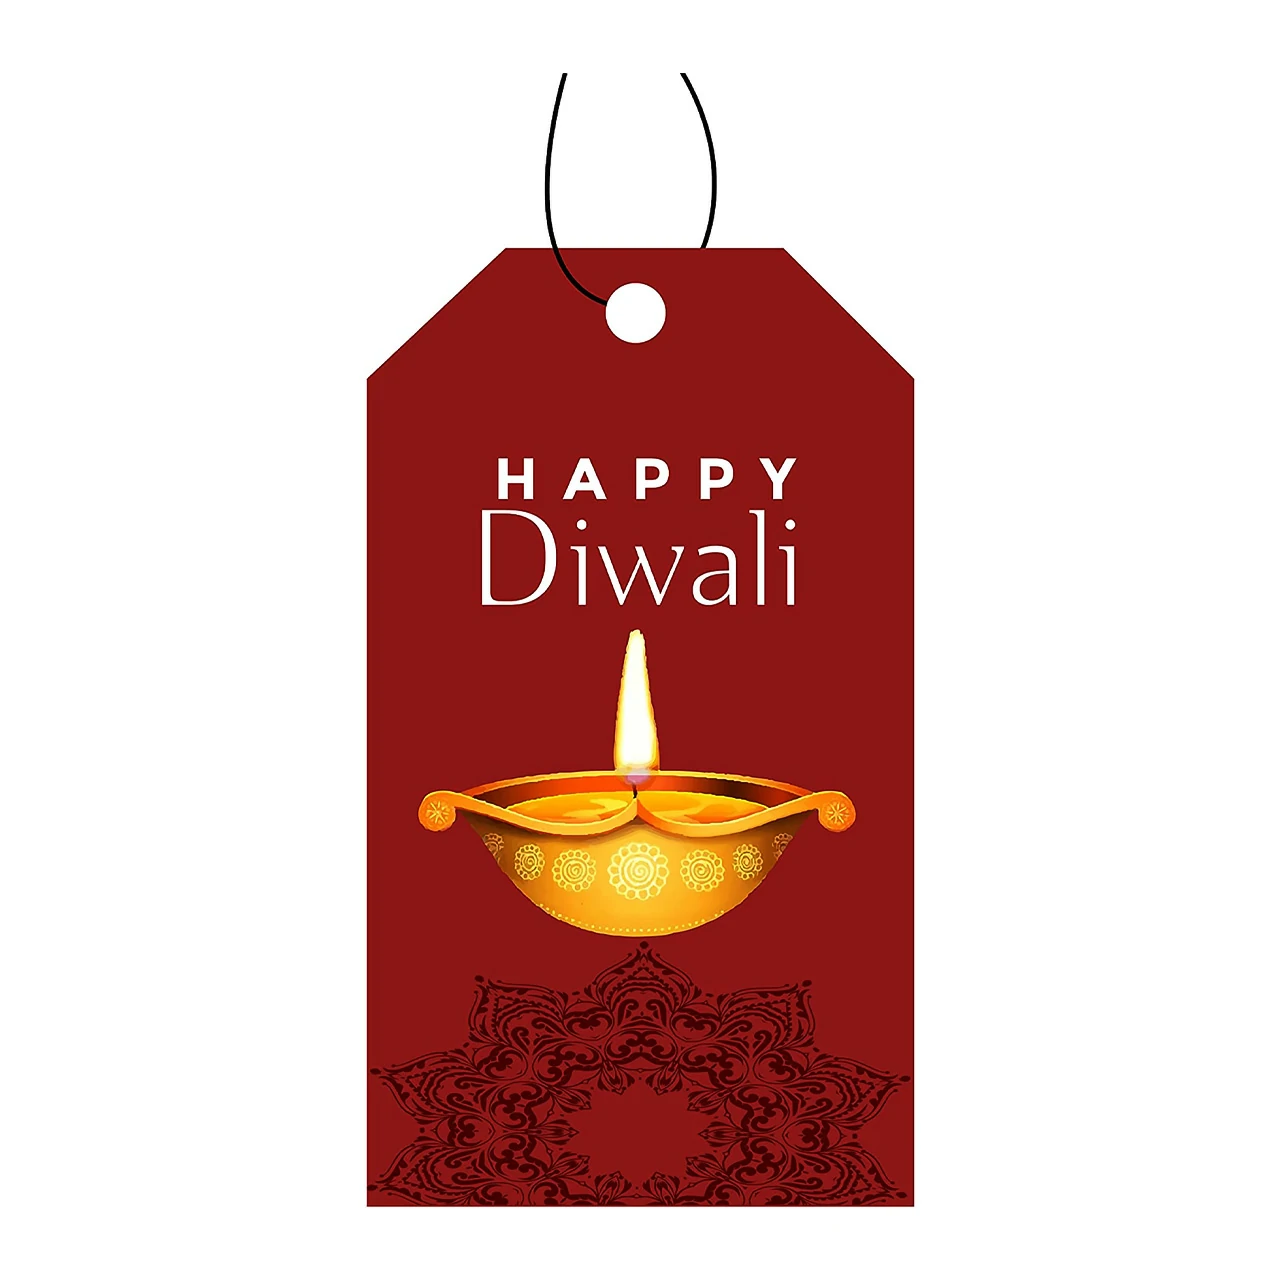 Diwali multicolored gift tags for gift packaging Diwali Gifts Diwali Gift Tags Diwali Gifts for Friends Diwali Gifts for Friends and Family Gifts for Diwali